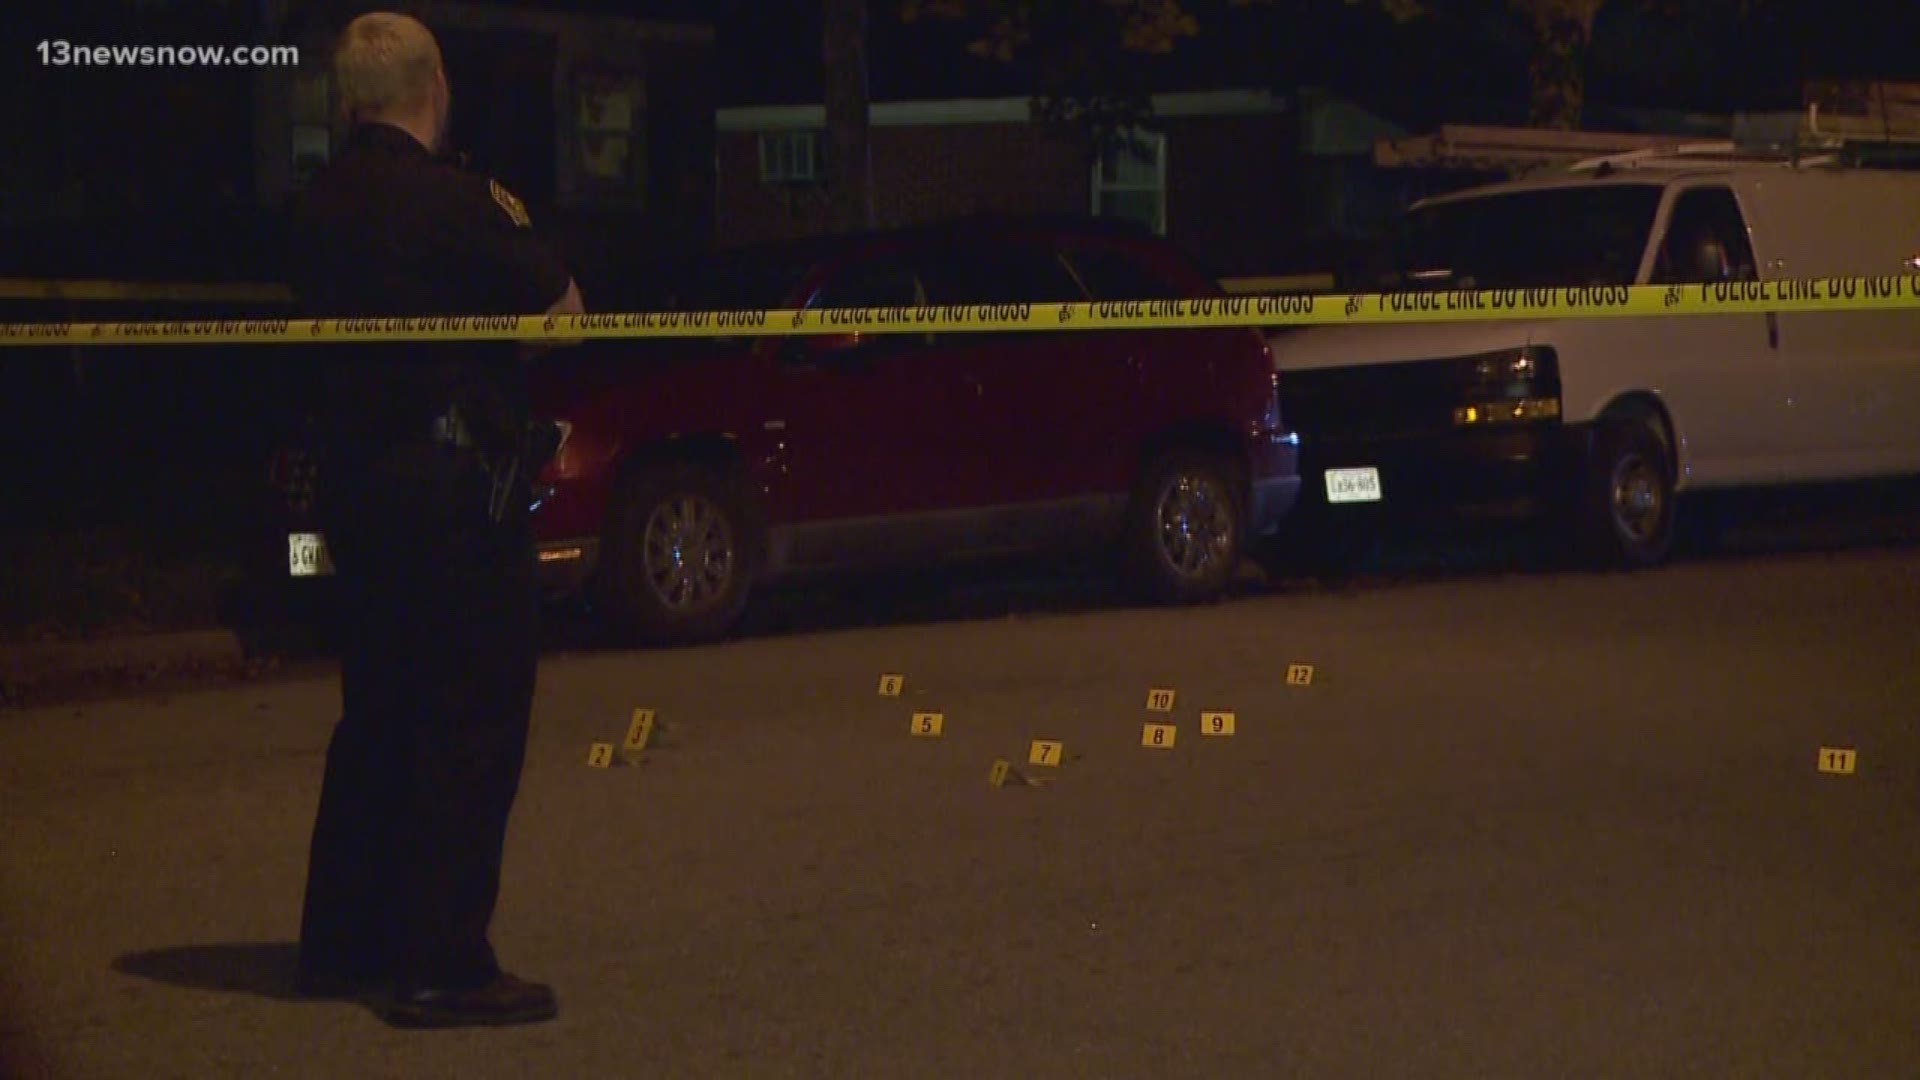 Three people, including two women and one man, were shot early Wednesday morning.